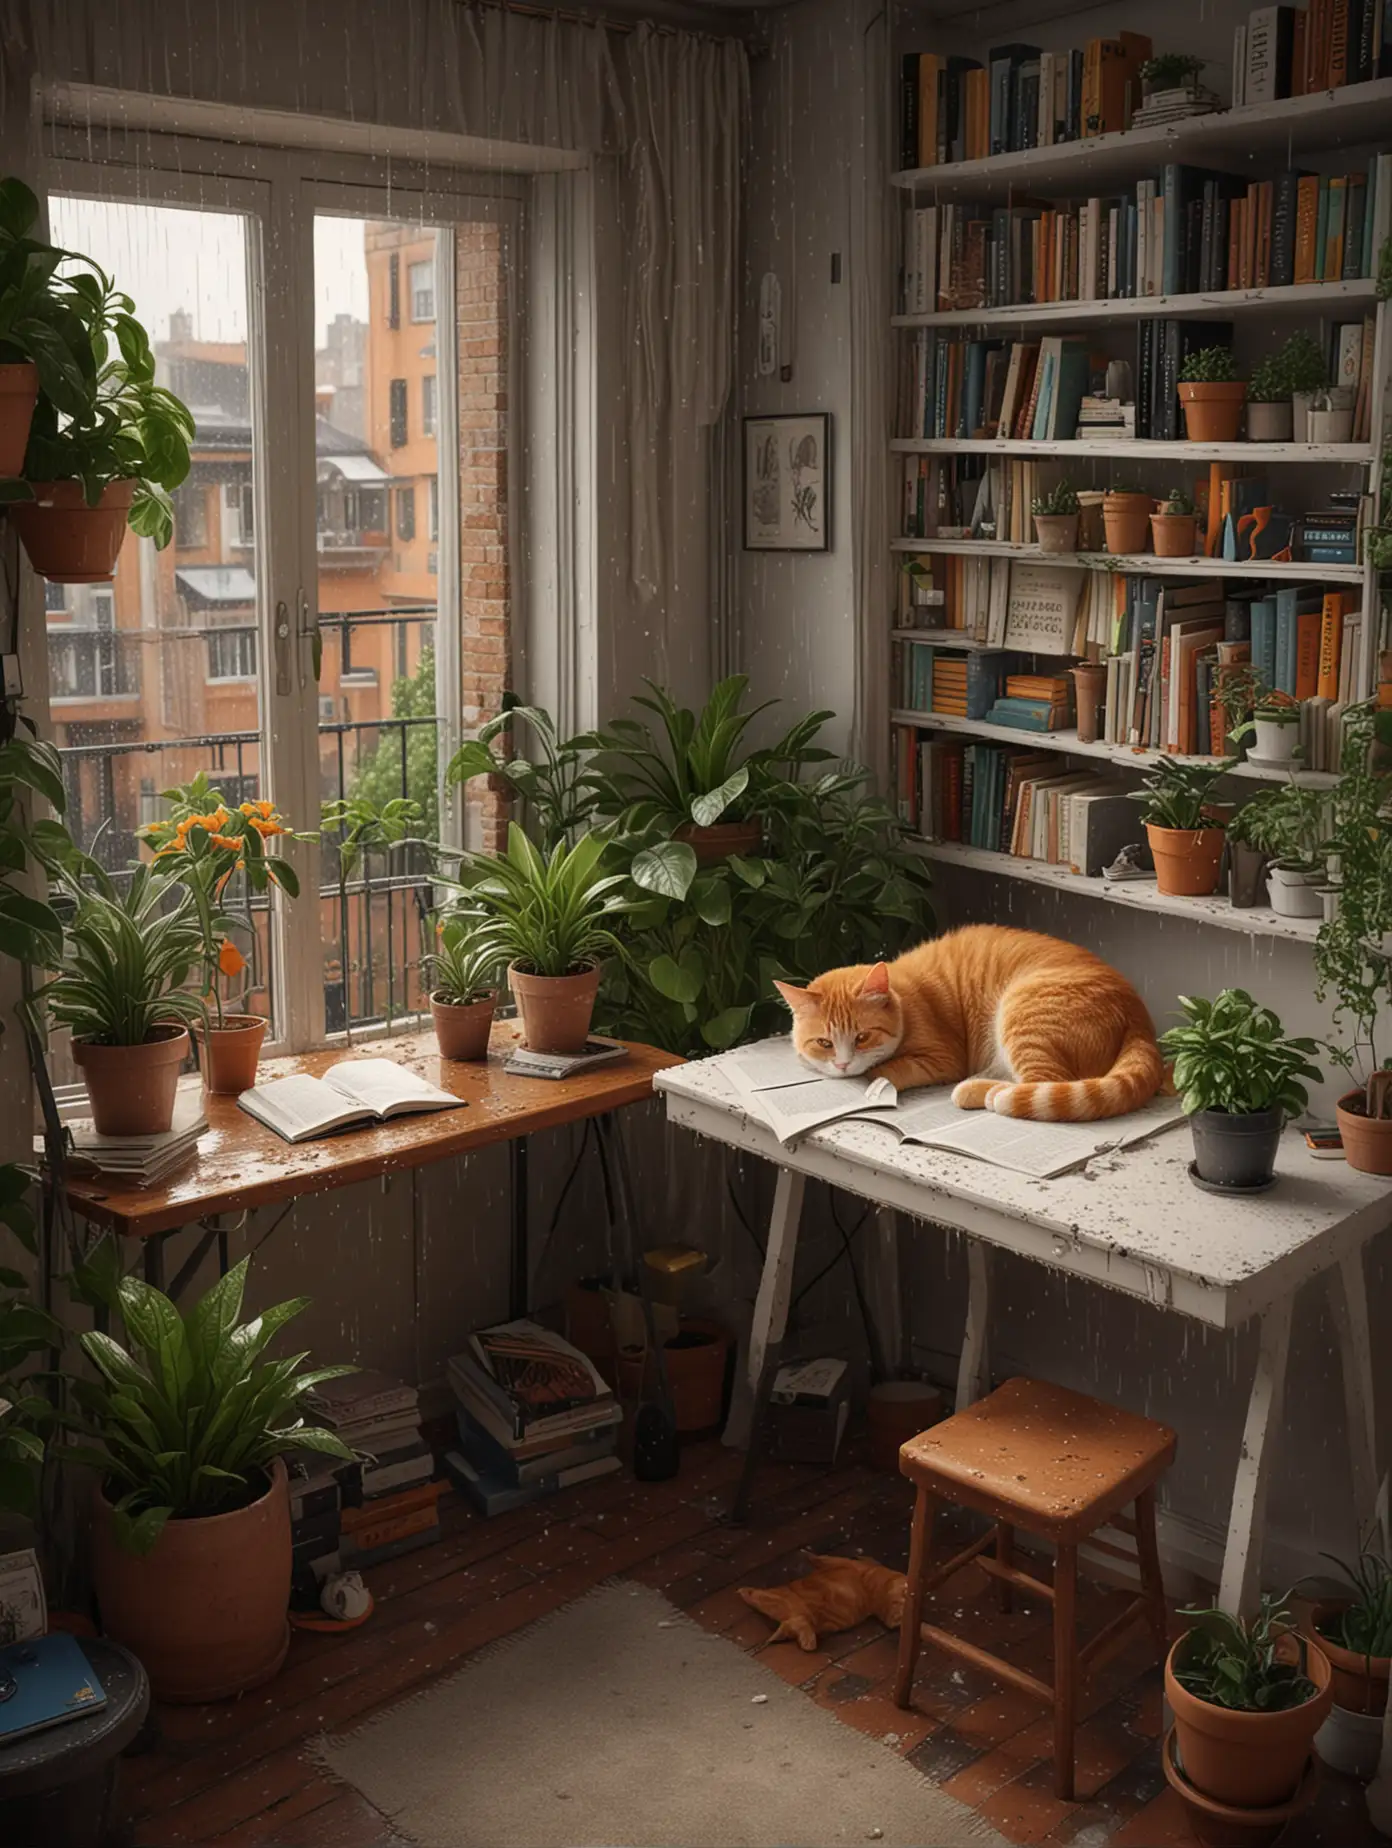 Outside the study is a balcony full of potted plants. There's a desk, a computer, a whole wall of books, full of detailed and realistic details, in 8k high definition. There's an orange cat sleeping on the floor, a white bed, rain falling outside the window, buildings below, a desk lamp, cozy.